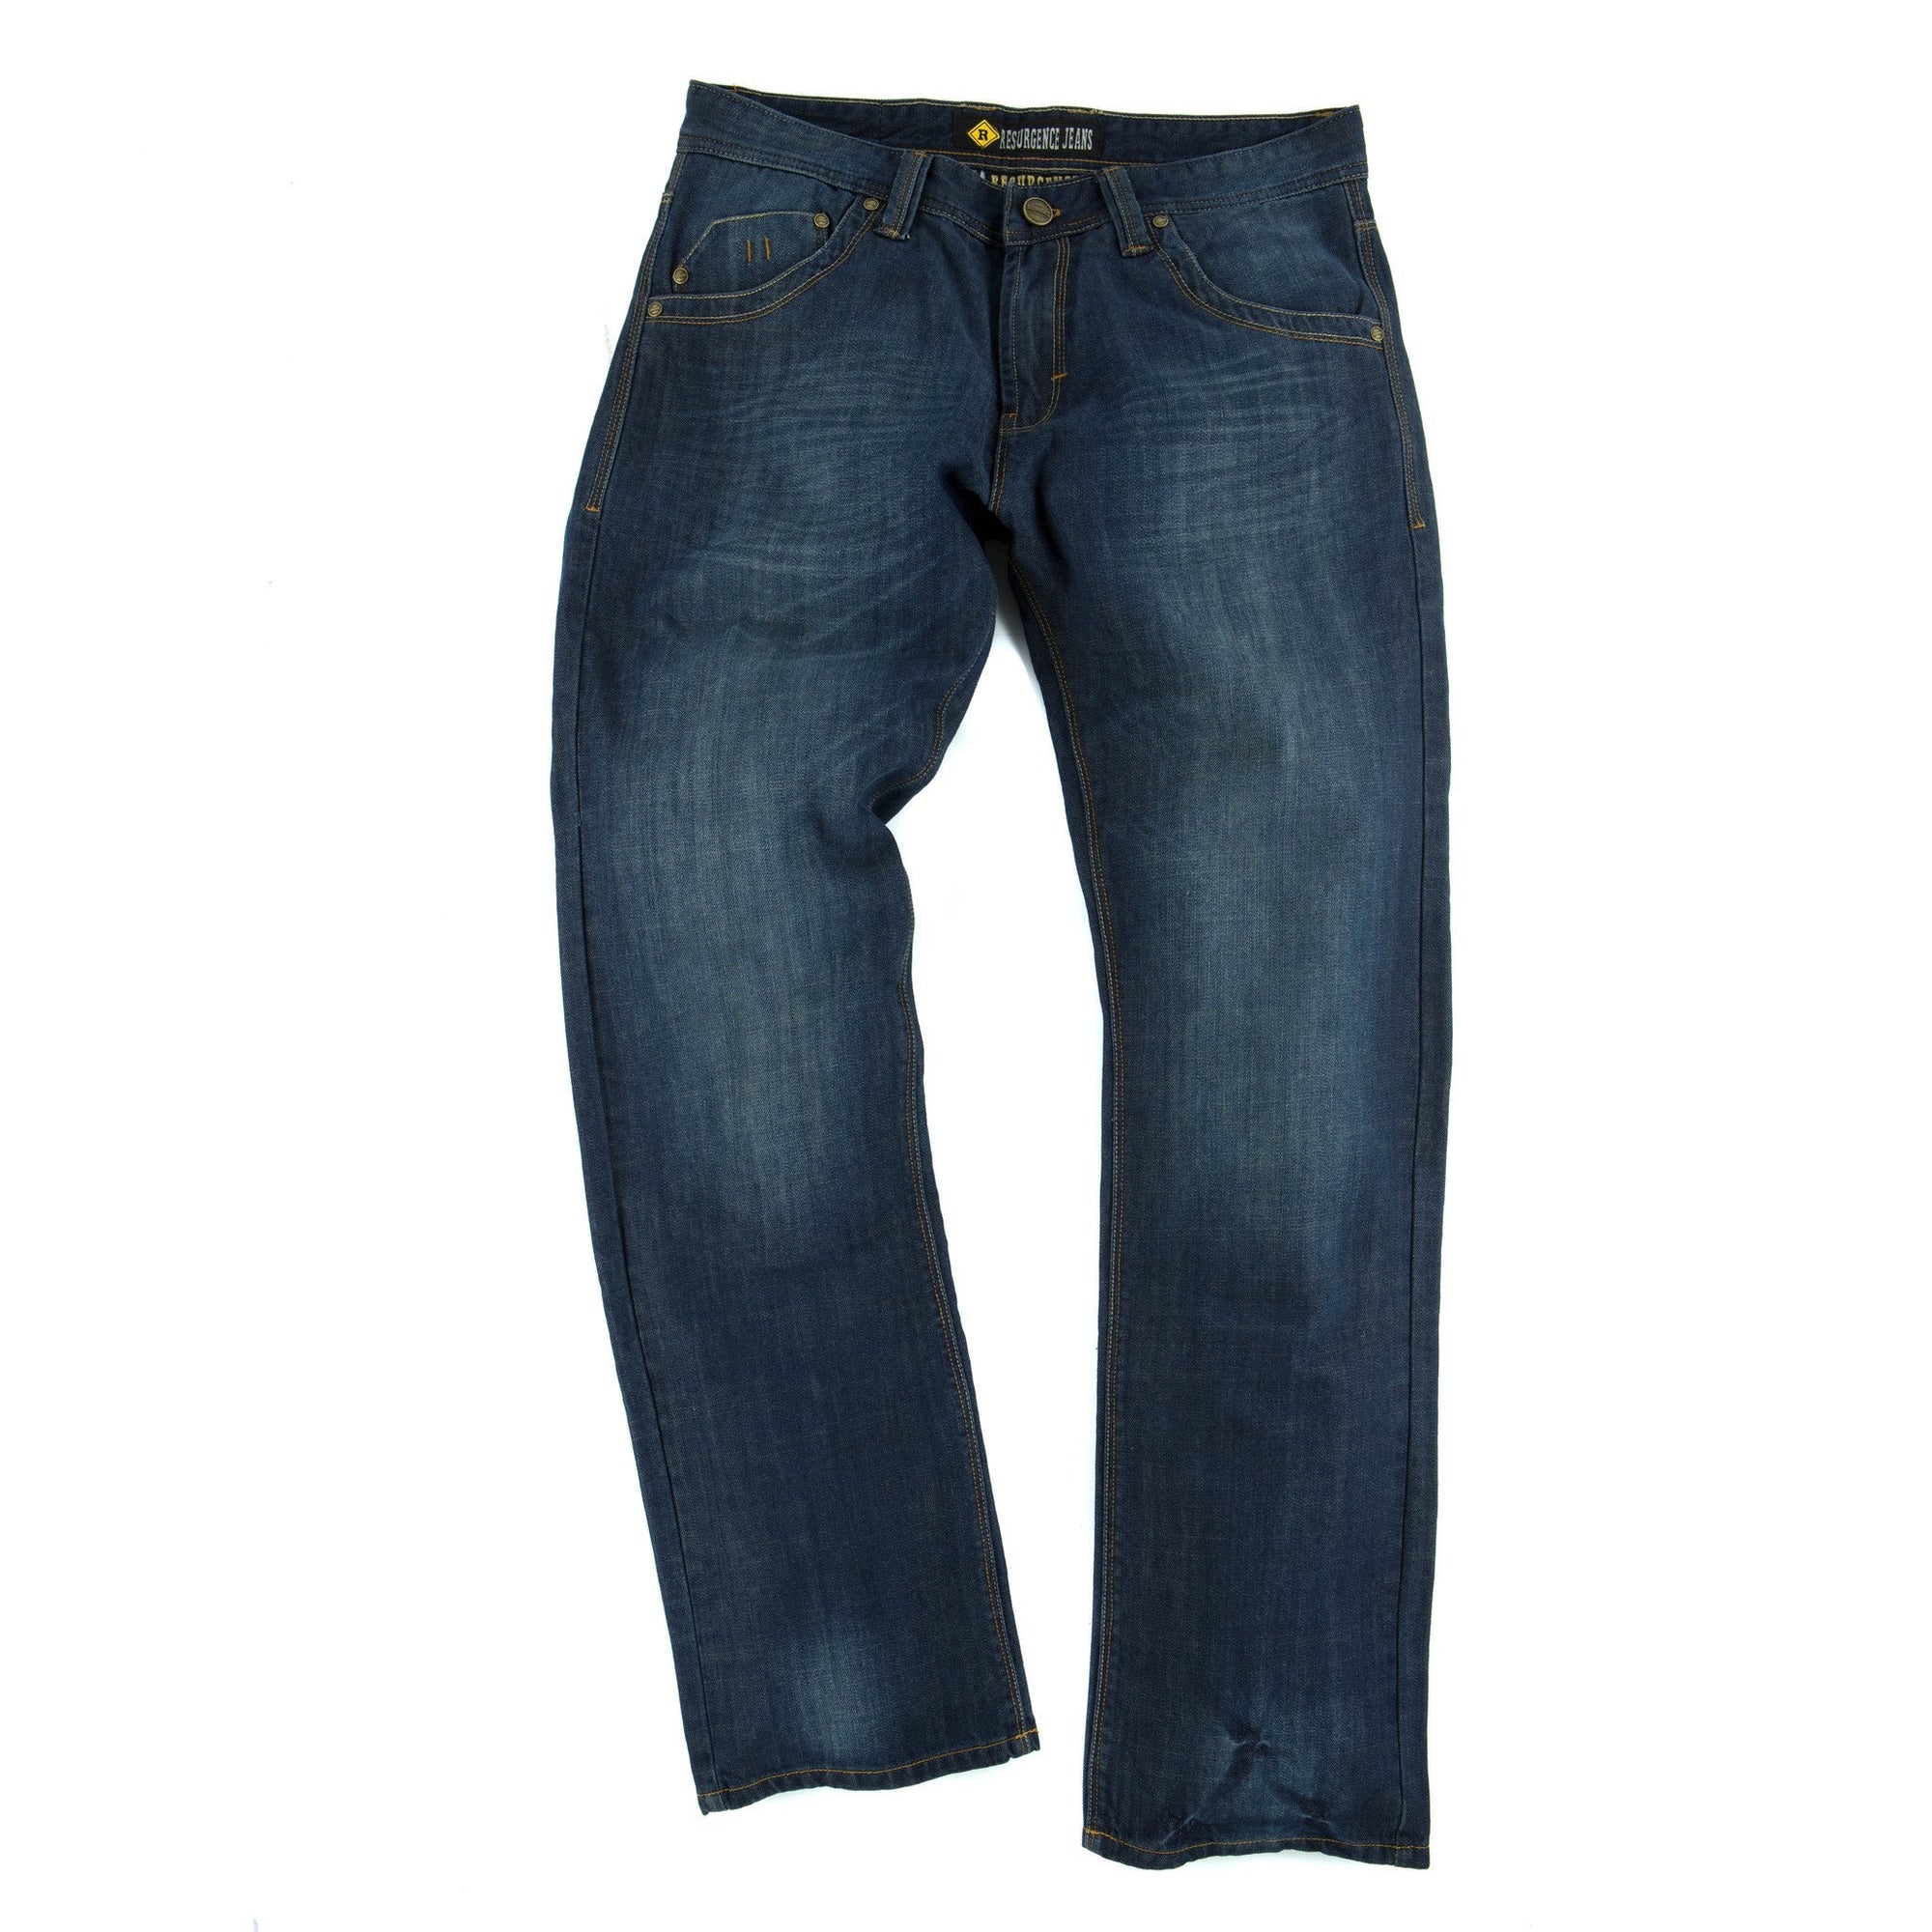 resurgence gear heritage mens protective motorcycle jeans in old school